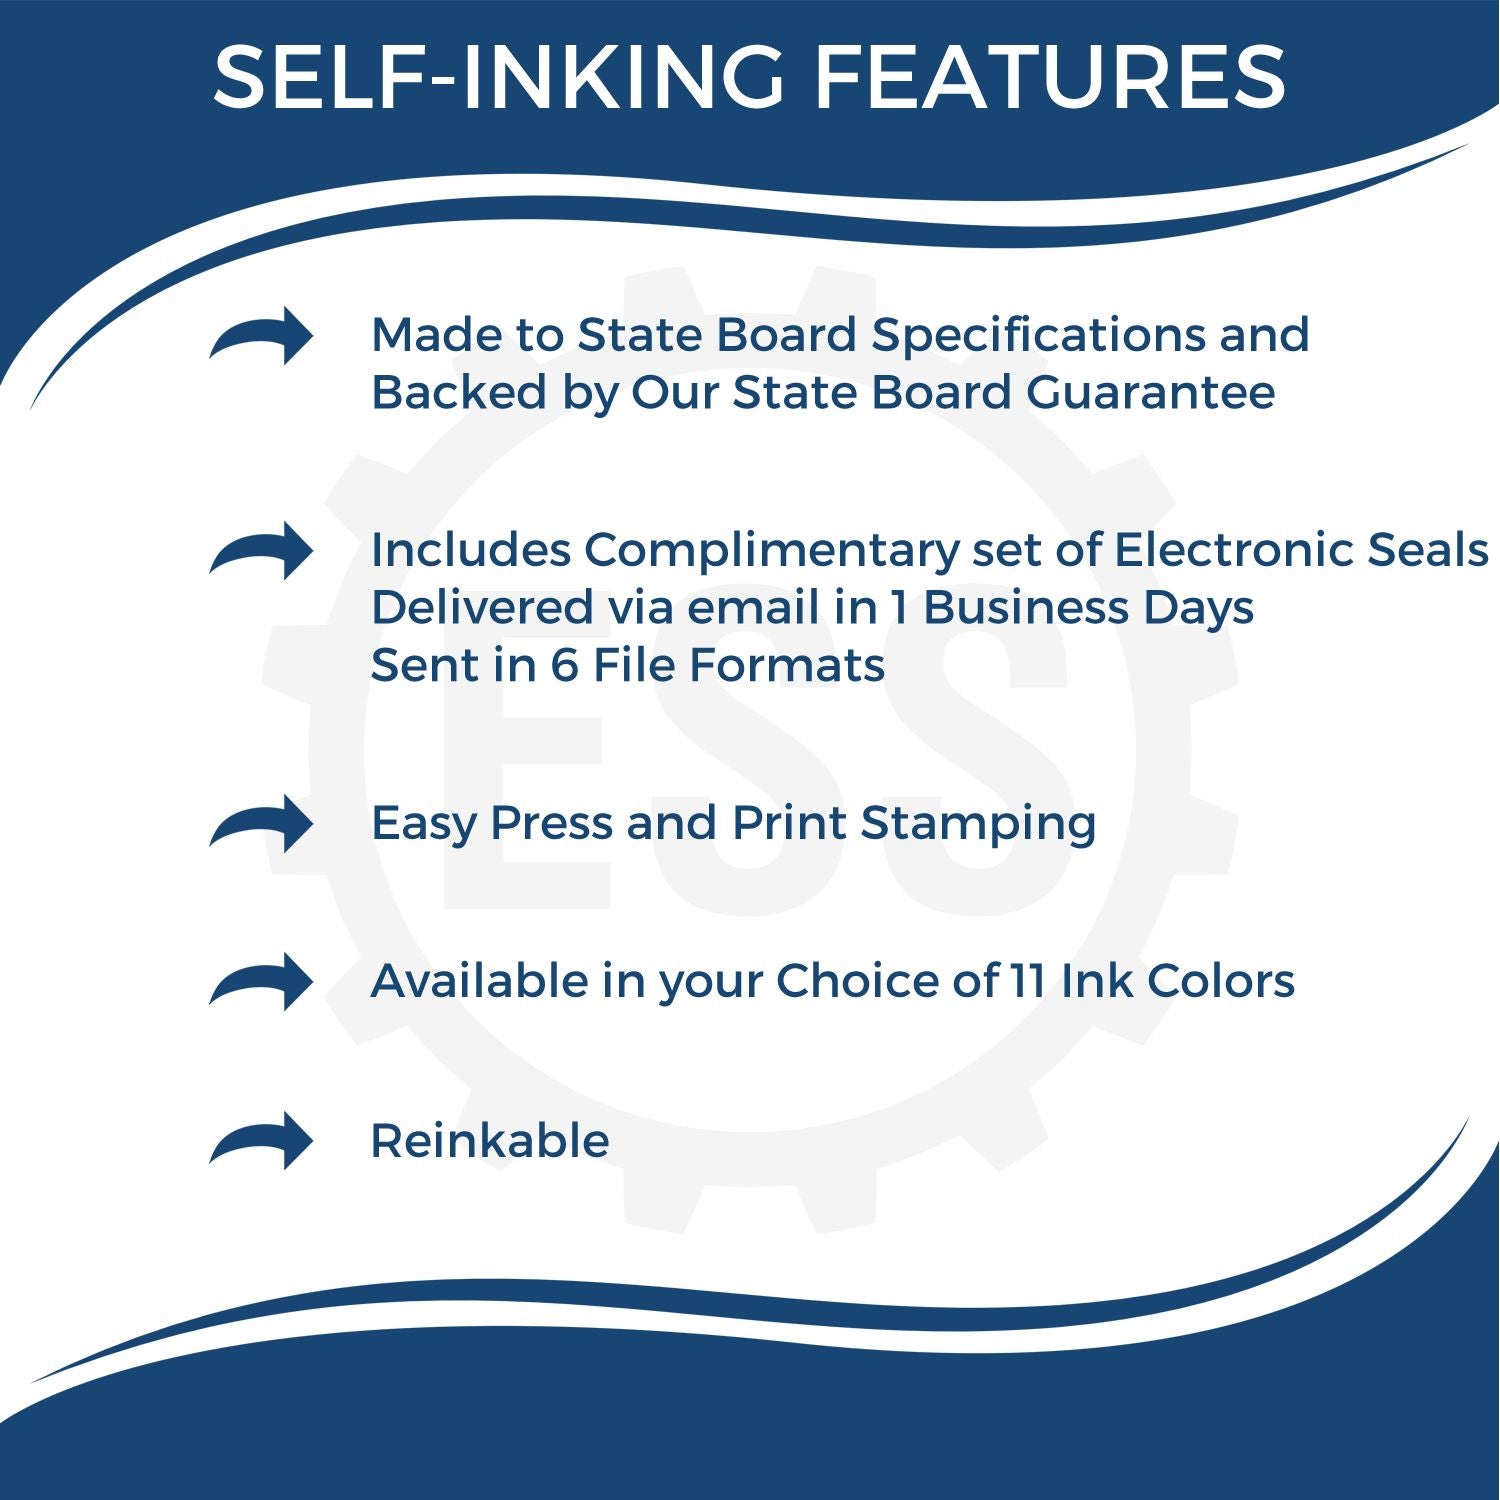 The main image for the Self-Inking South Carolina PE Stamp depicting a sample of the imprint and electronic files